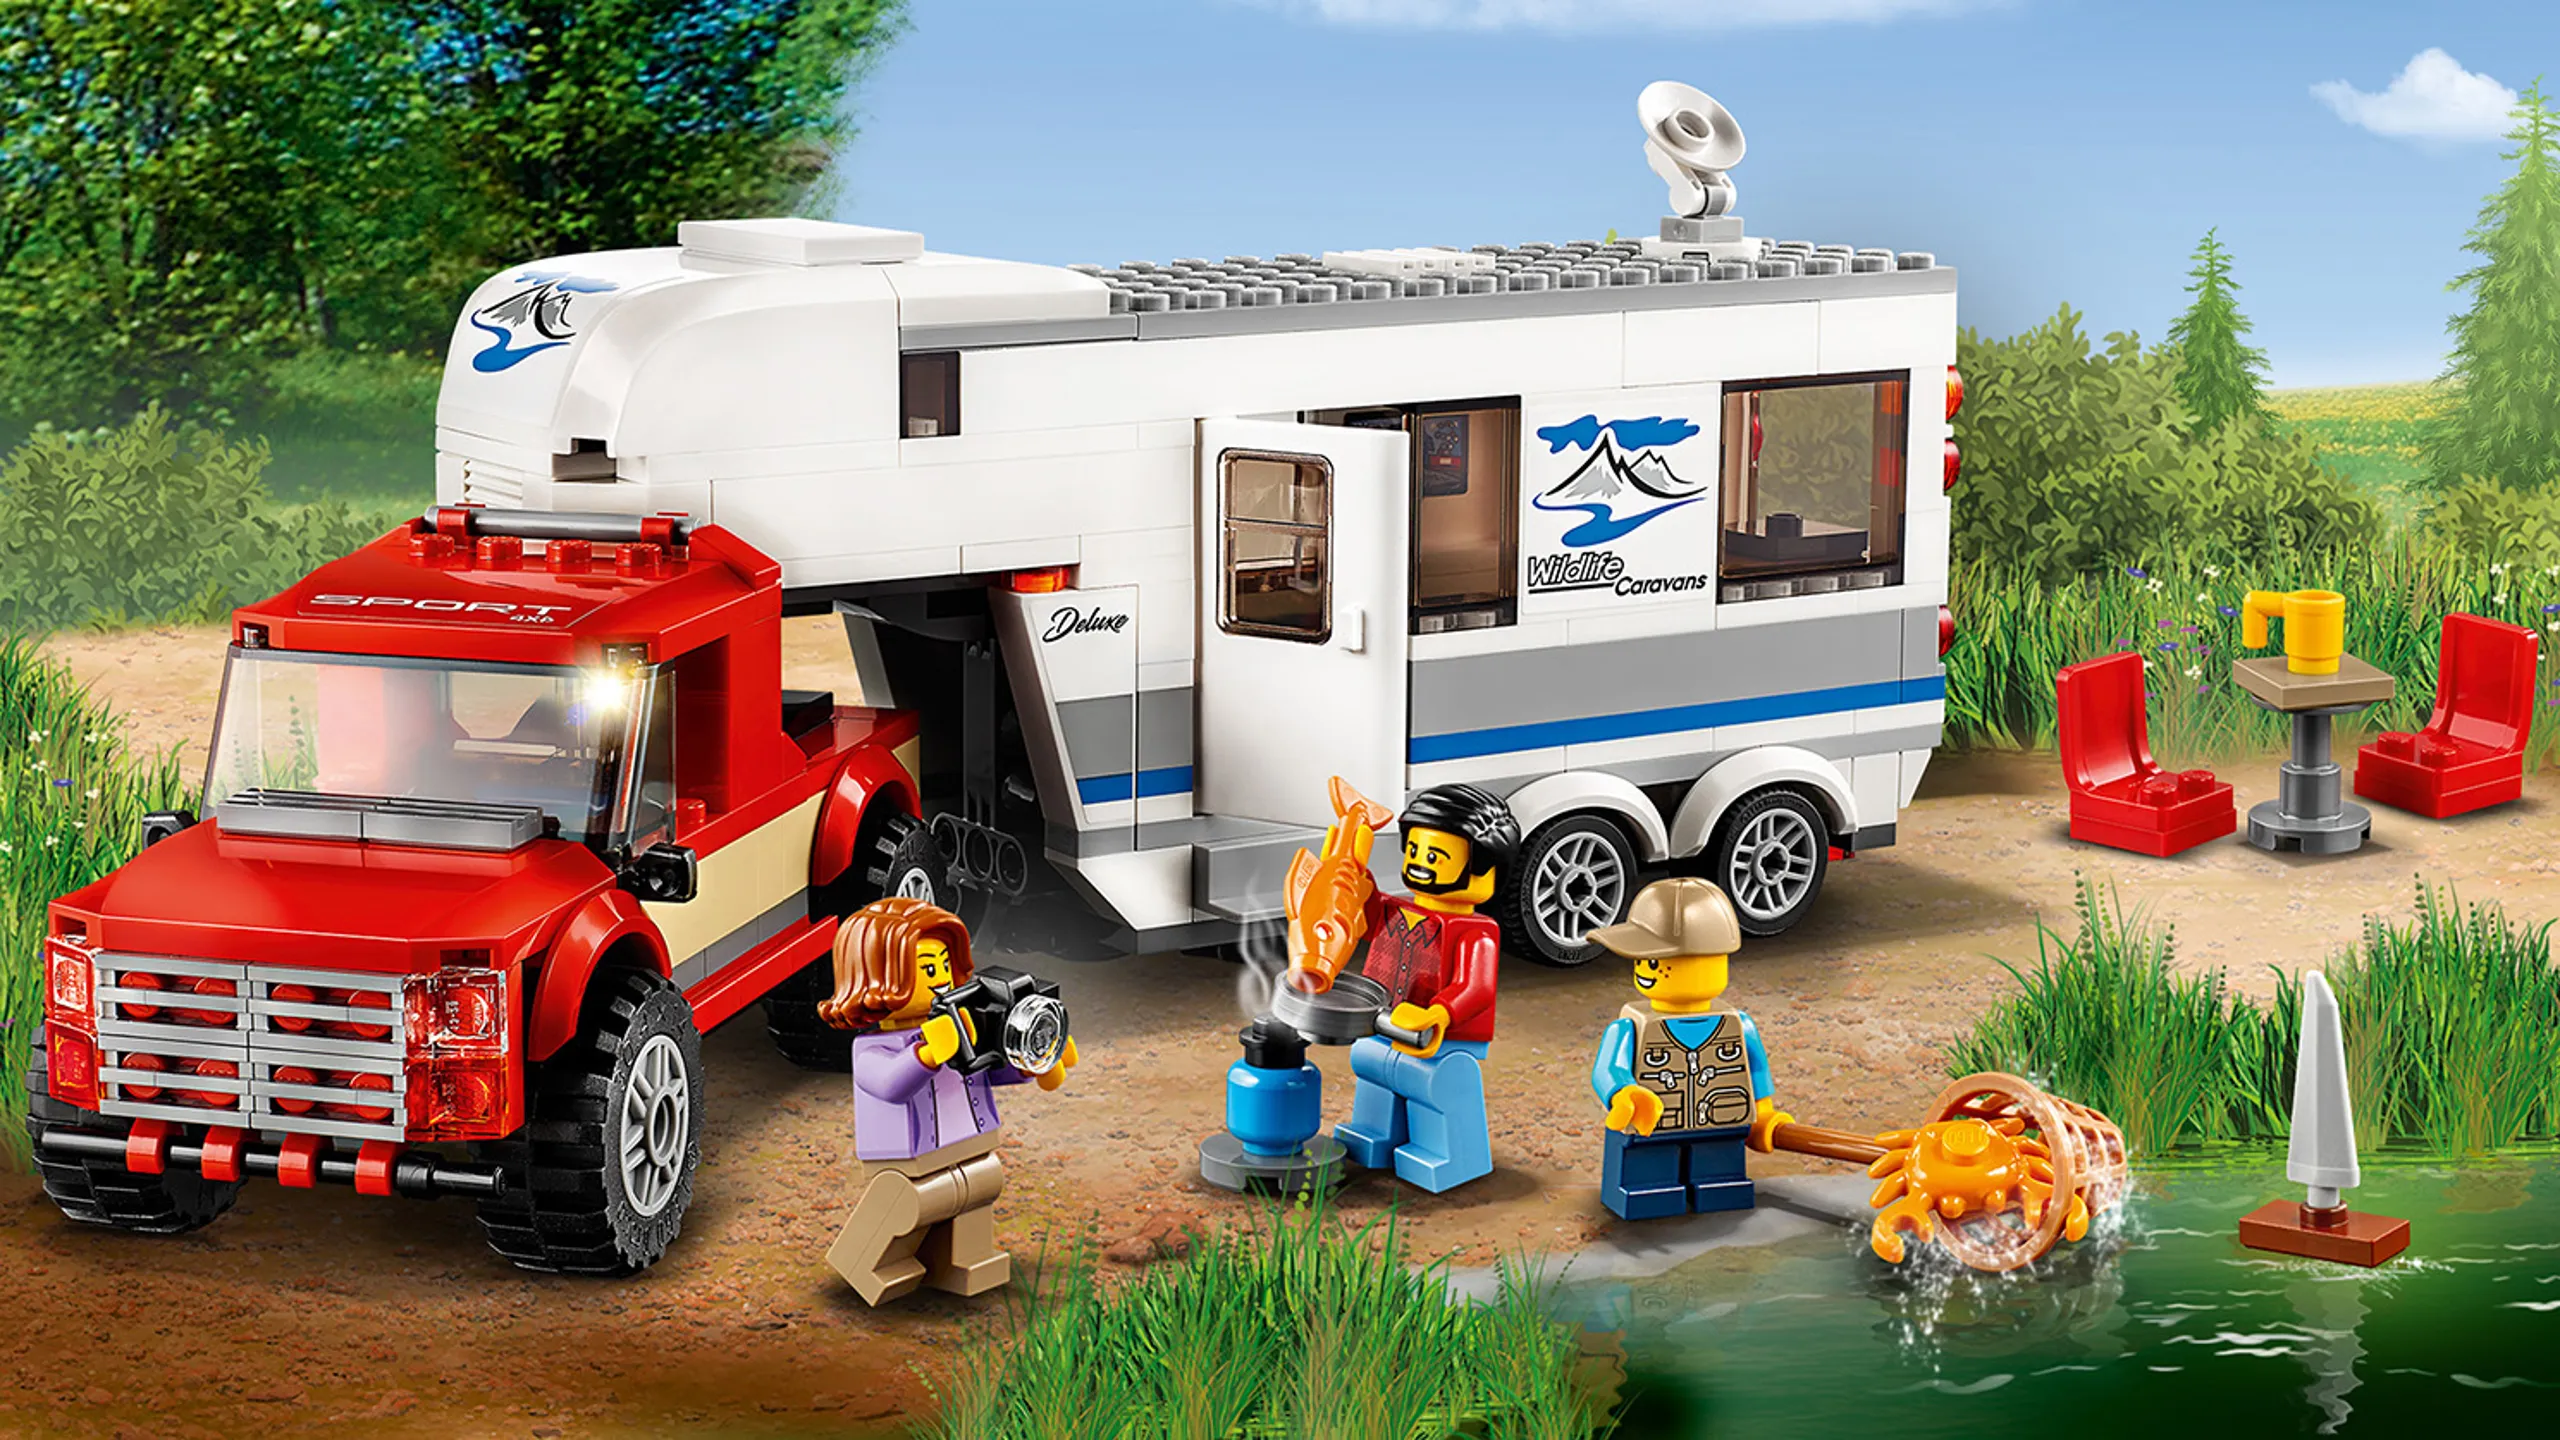 LEGO City Great Vehicles - 60182 Pickup and Caravan - The family enjoys a camping trip in the forest.